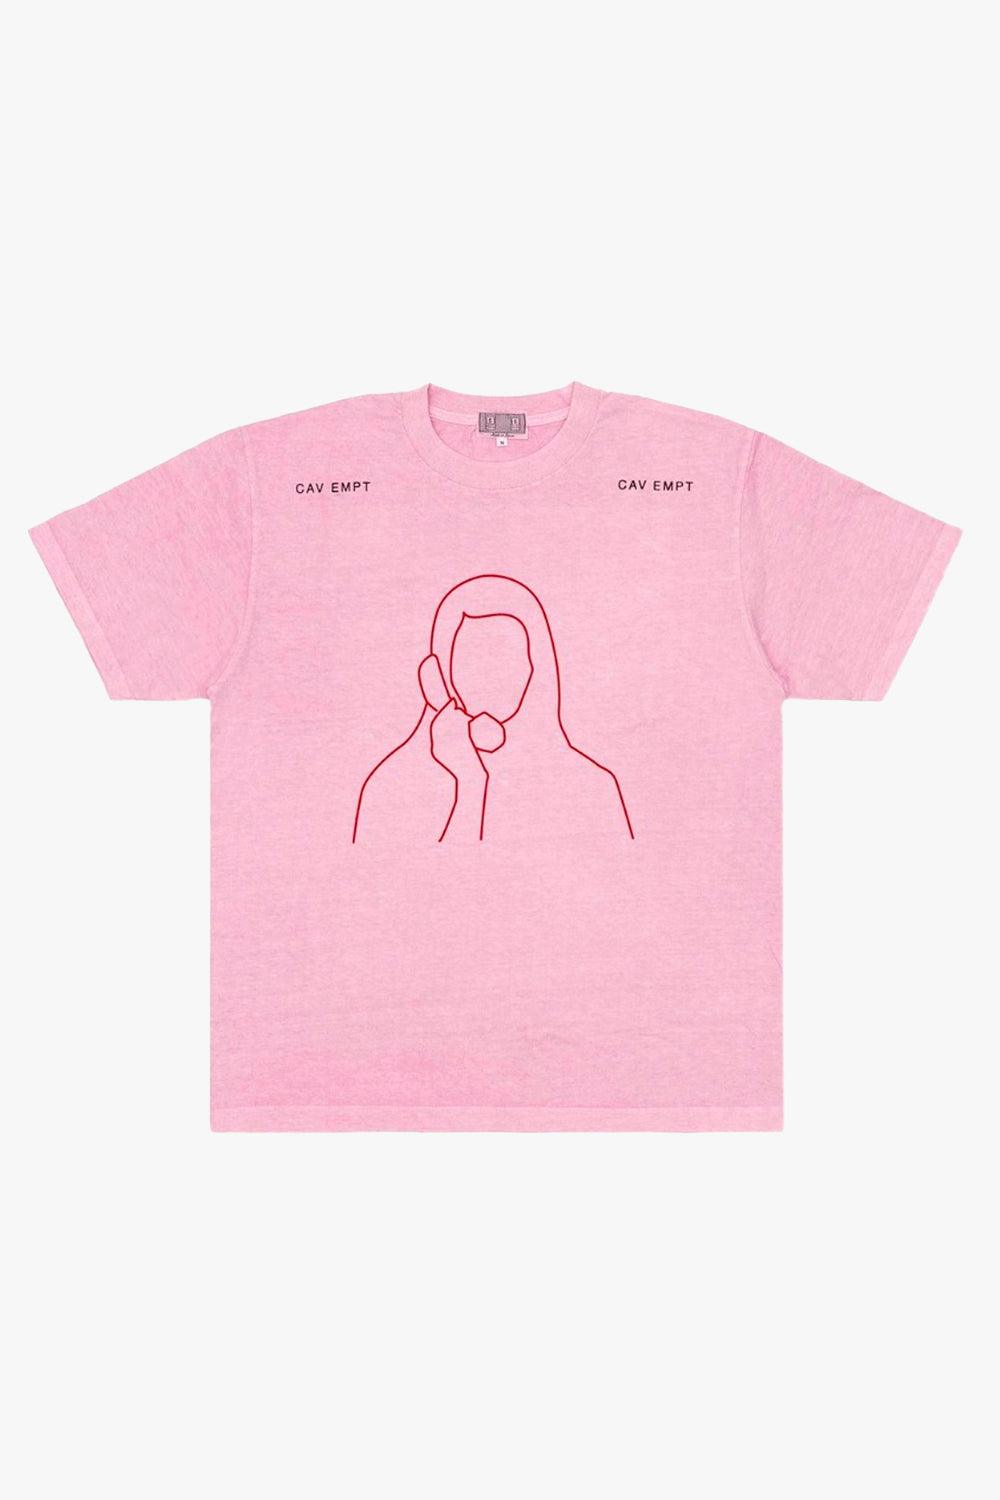 Hello Babe Pink T-Shirt - Aesthetic Clothes Shop